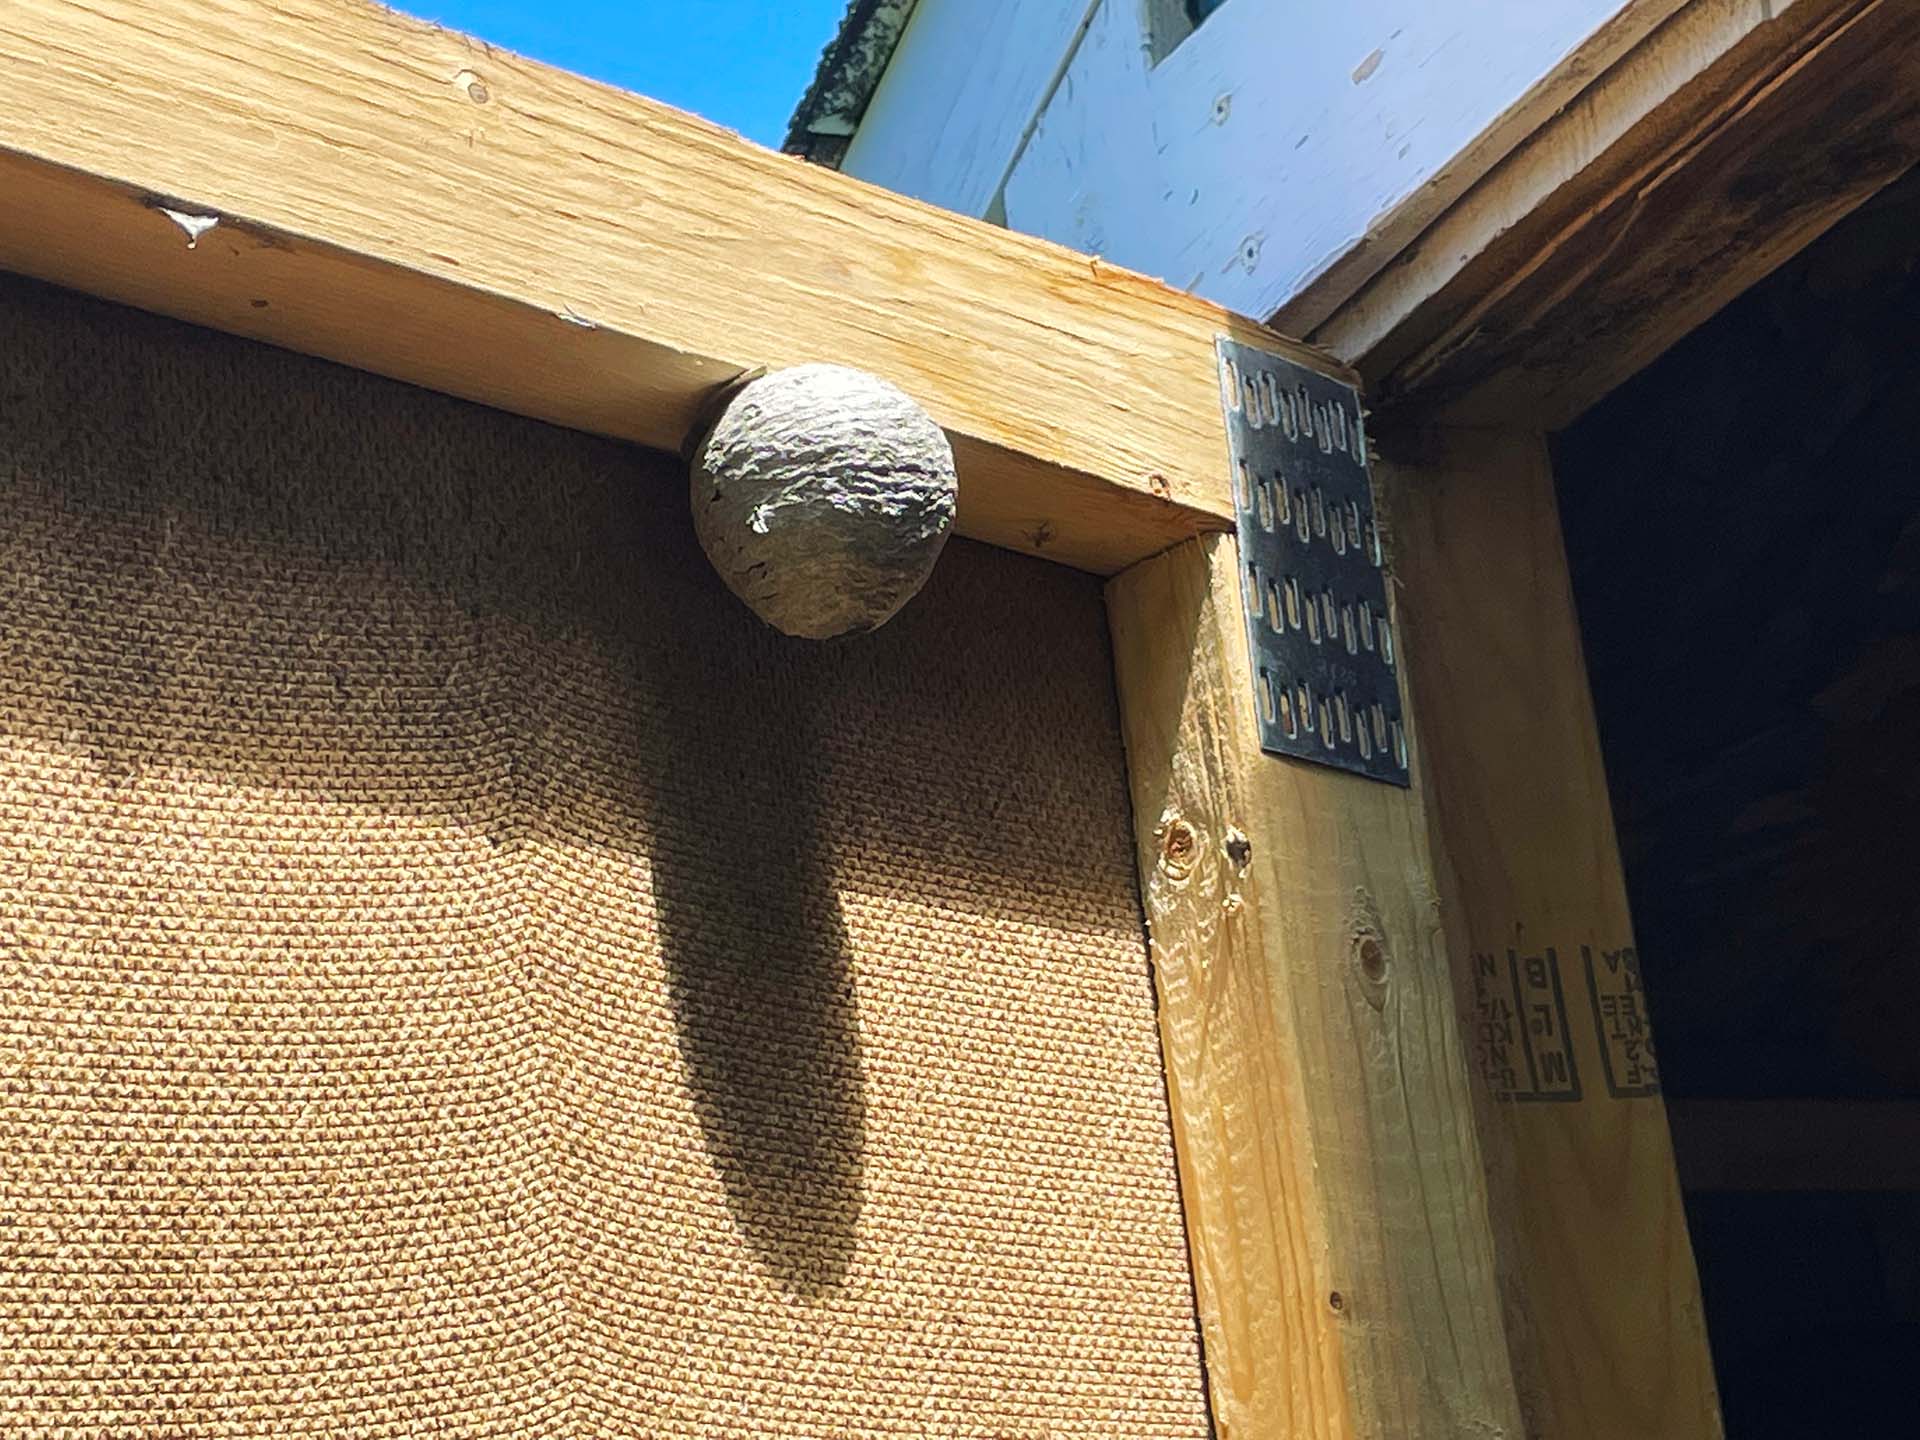 How to Spot Wasp Activity - picture shows a small wasp nest about the size of a tennis ball, this will get larger as the warmer months progress